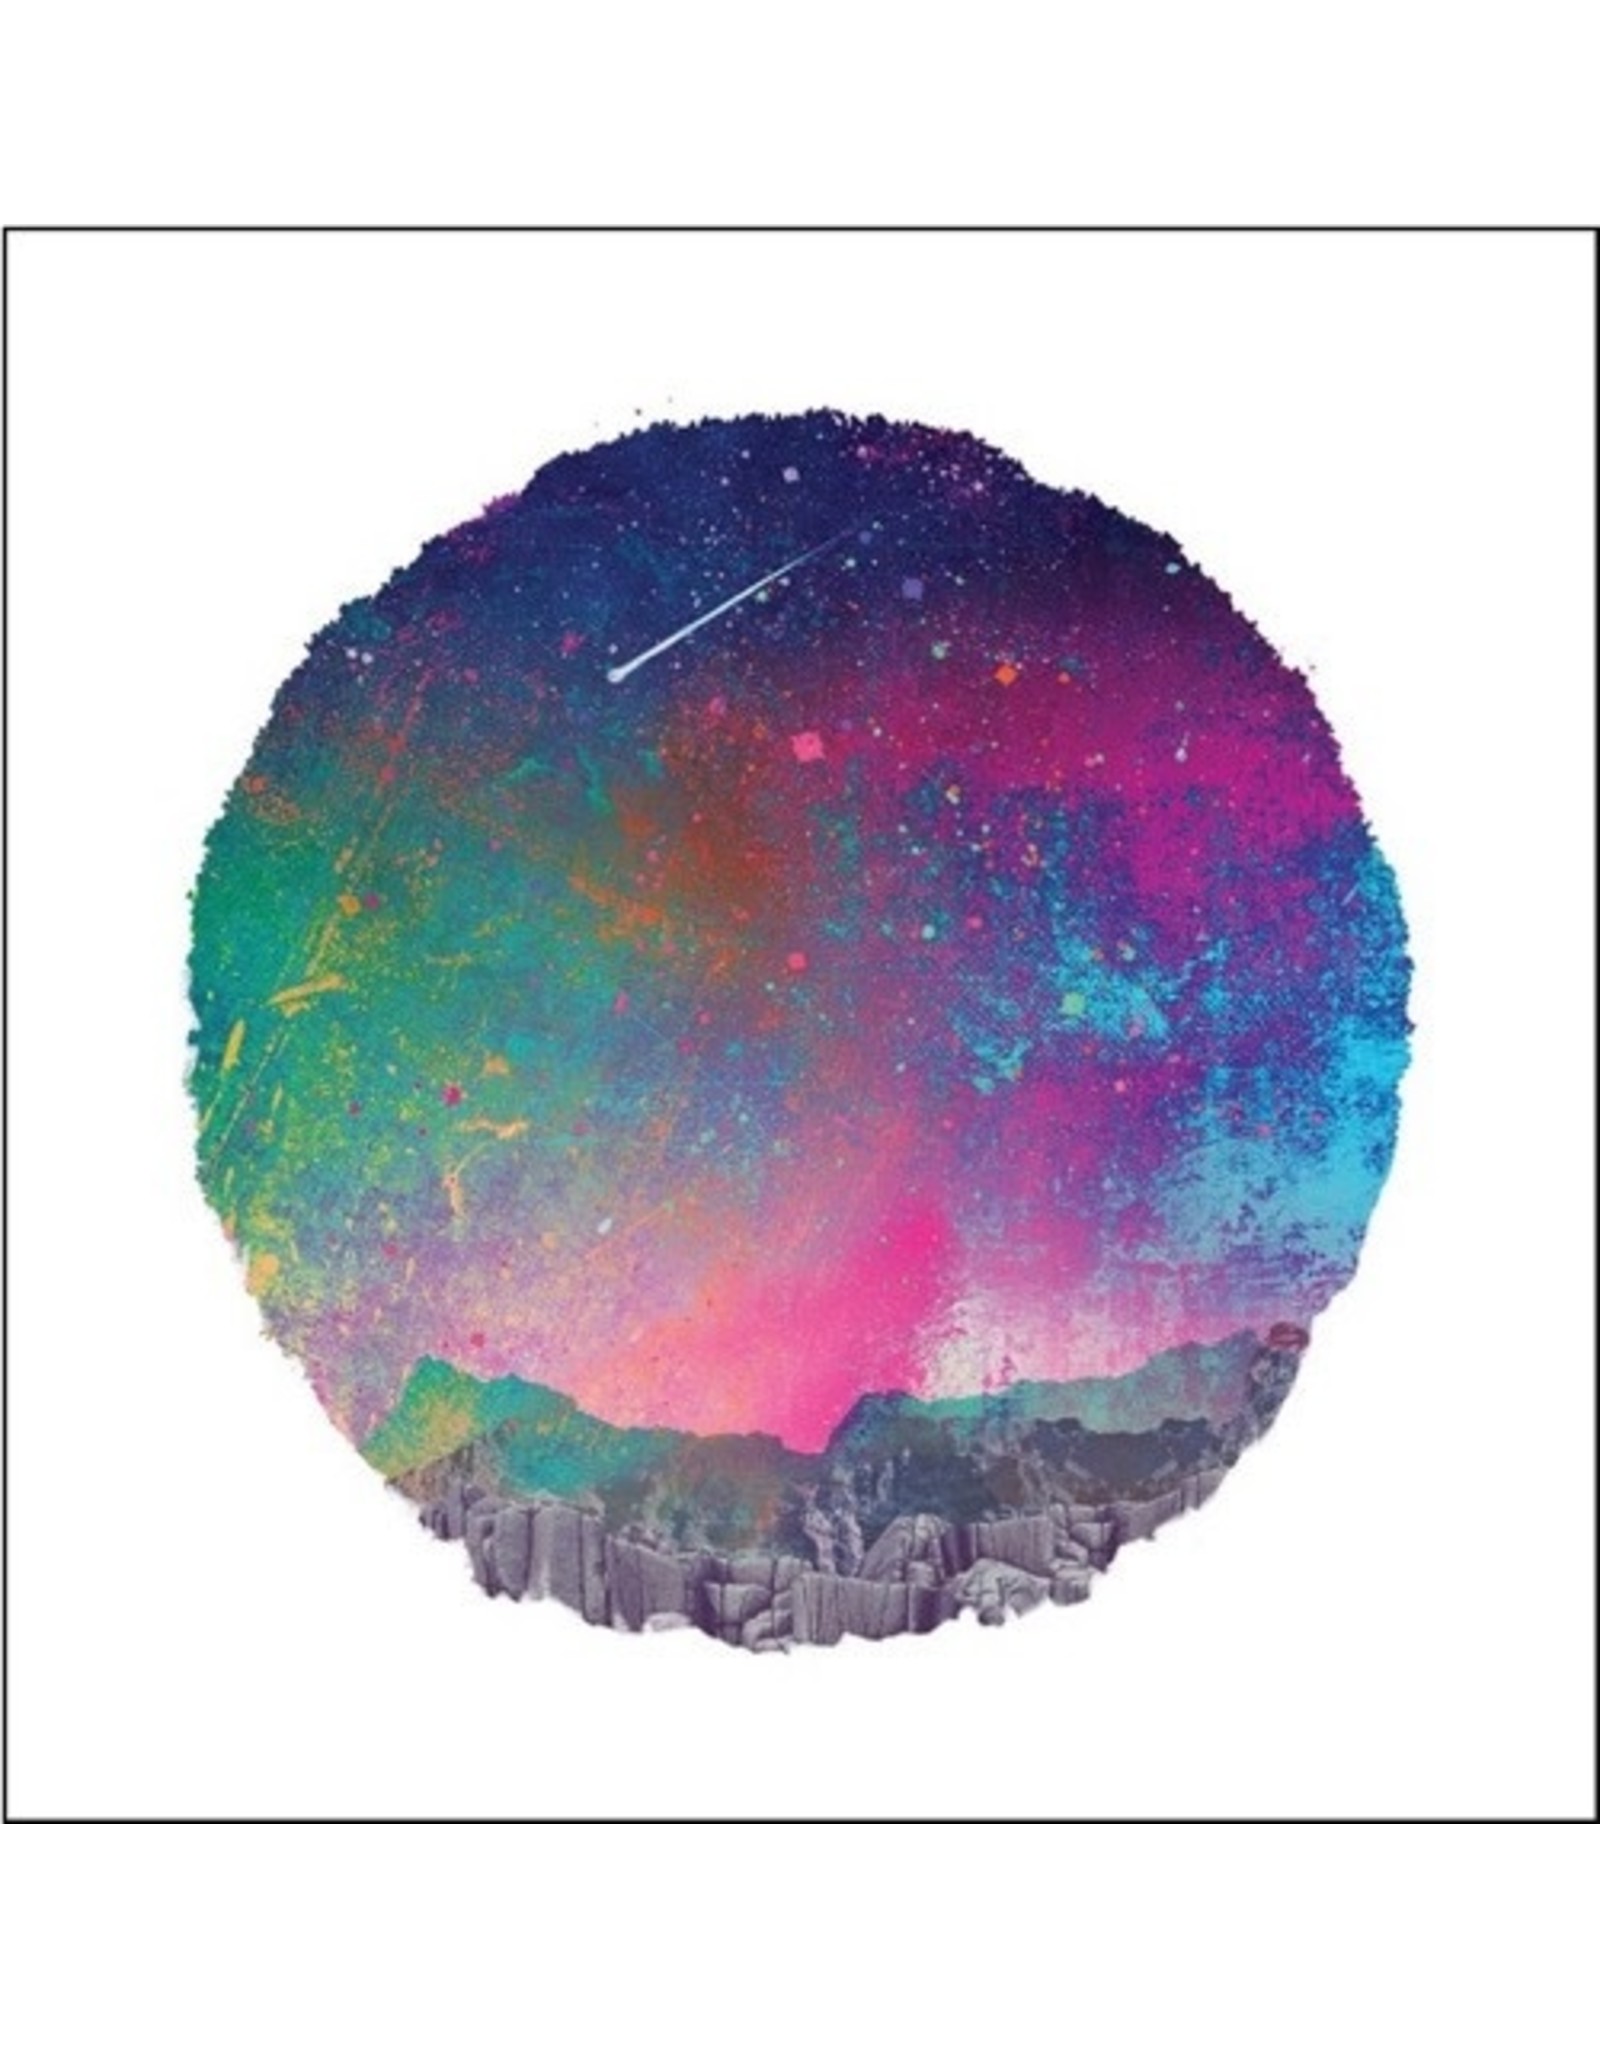 Night Time Stories Khruangbin: The Universe Smiles Upon You LP